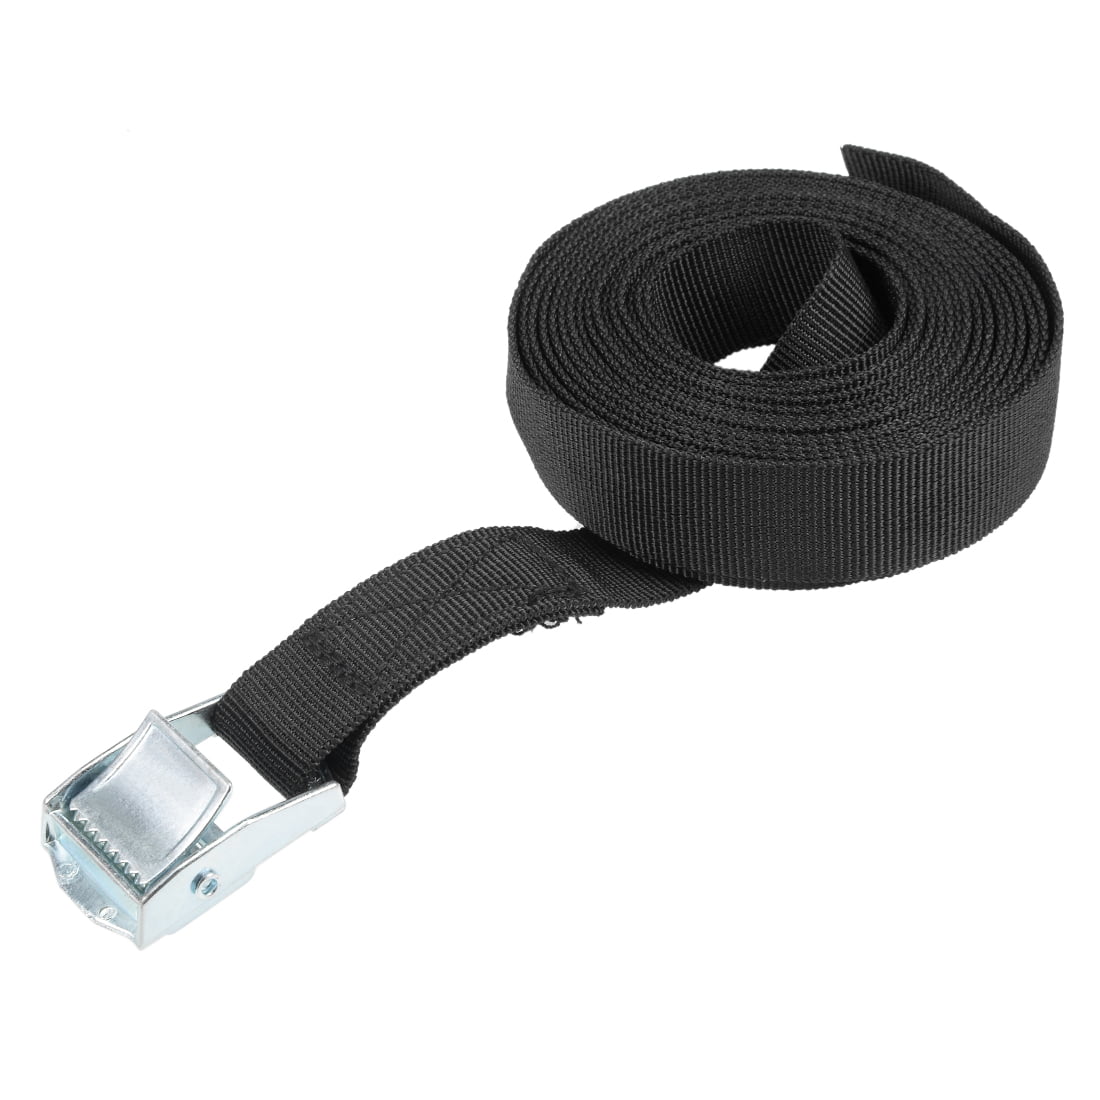 4PK 1" x 16Ft  Cam Lock Buckle Tie Down Straps Up To 600LBS Cargo Lashing straps 